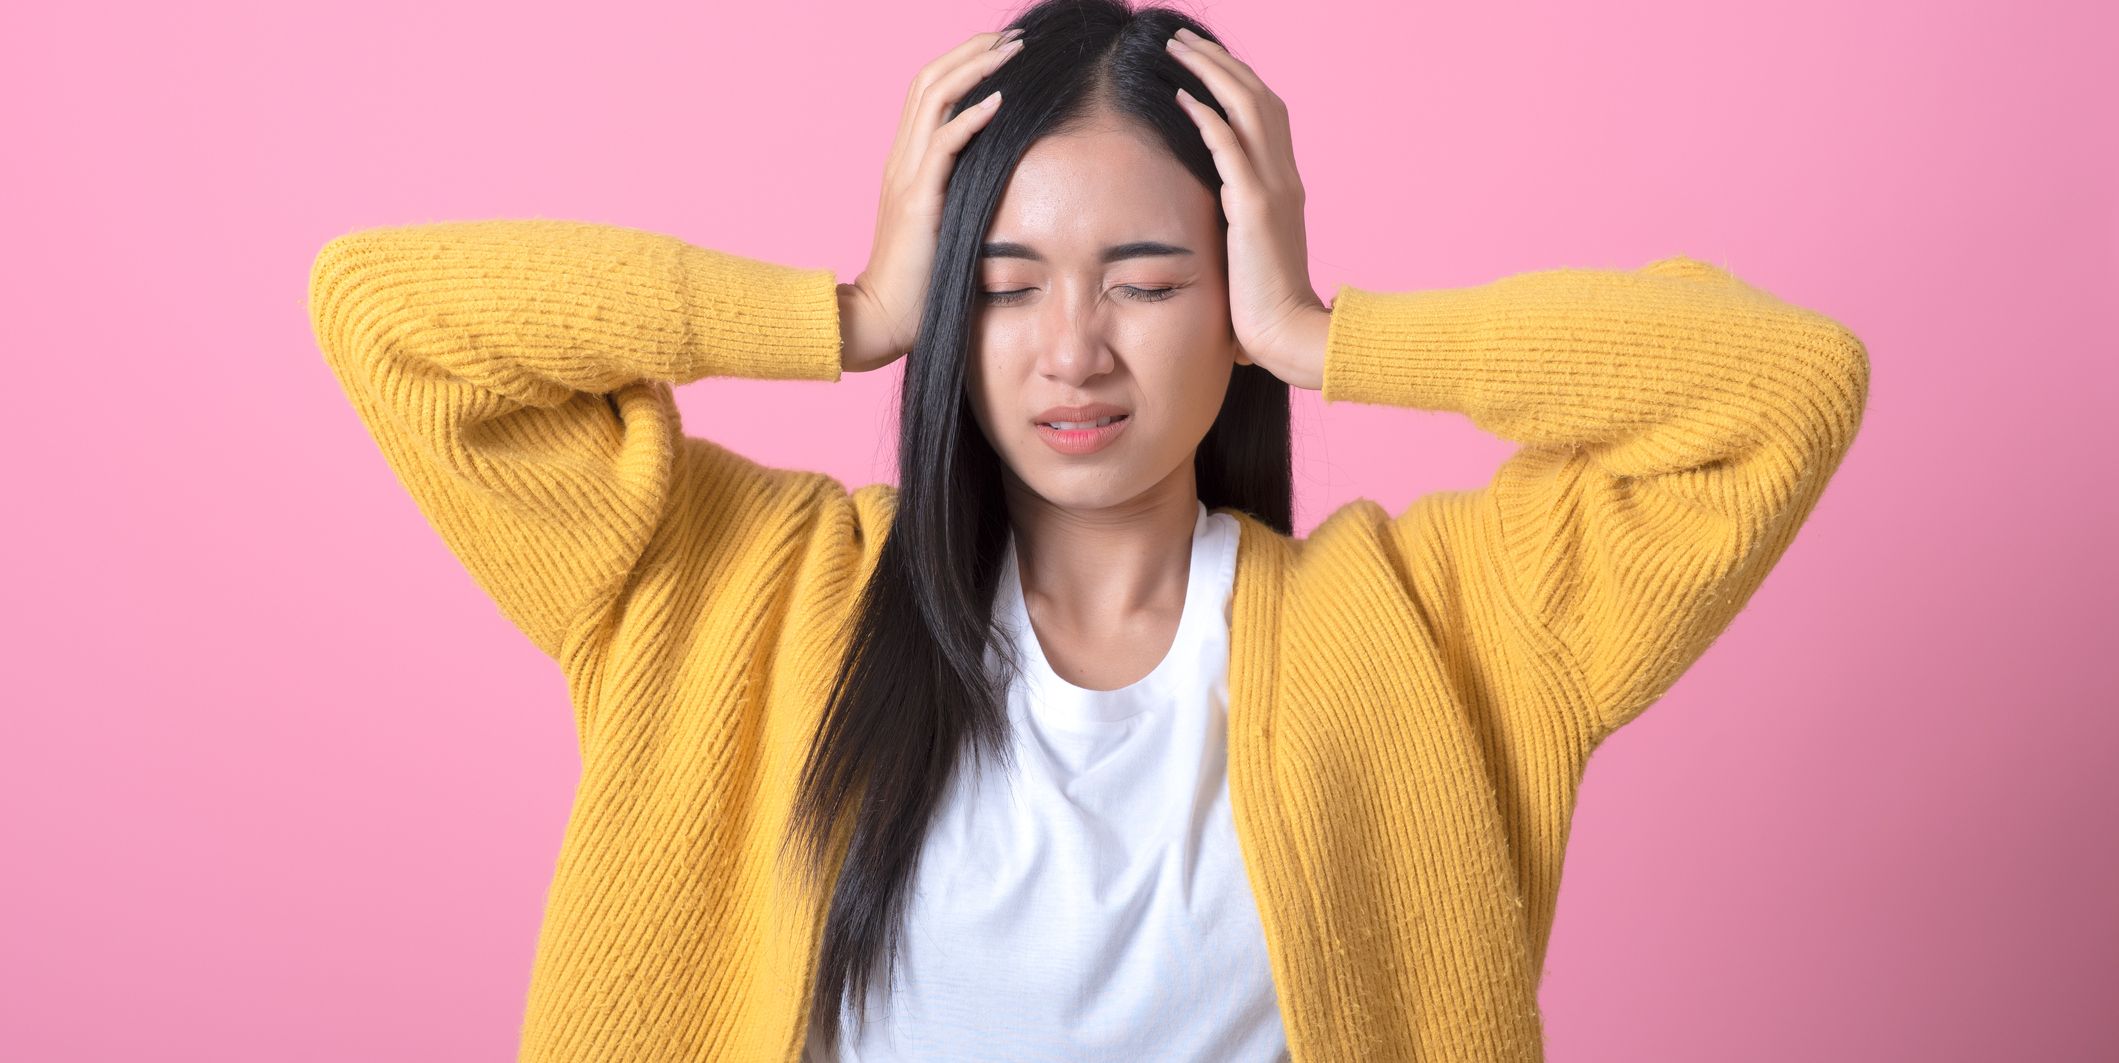 How To Get Rid Of A Migraine Fast, According To Doctors